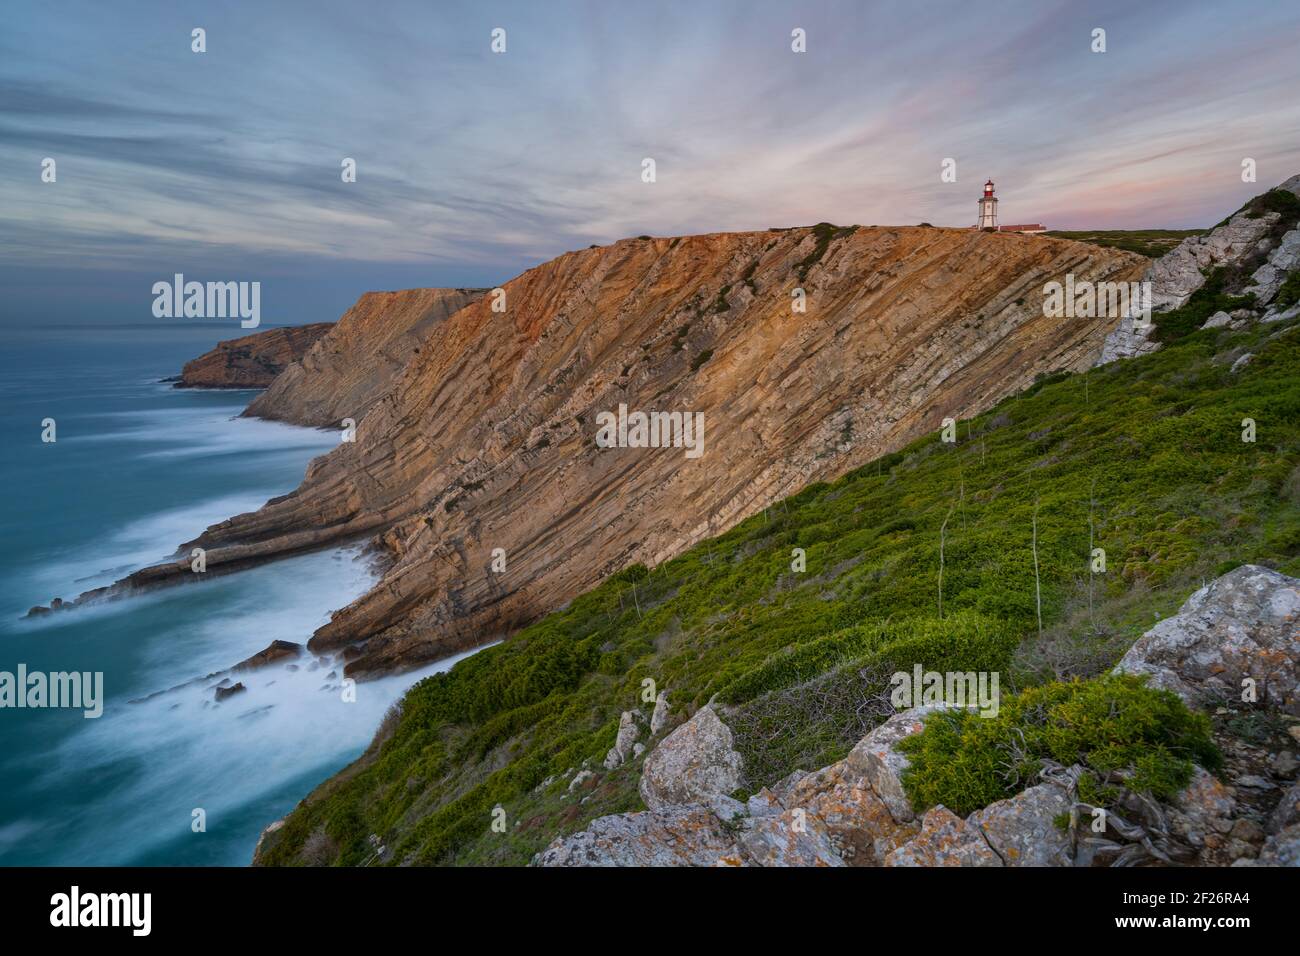 Cabo Espichel cape at sunset with sea cliffs and atlantic ocean landscape, in Portugal Stock Photo